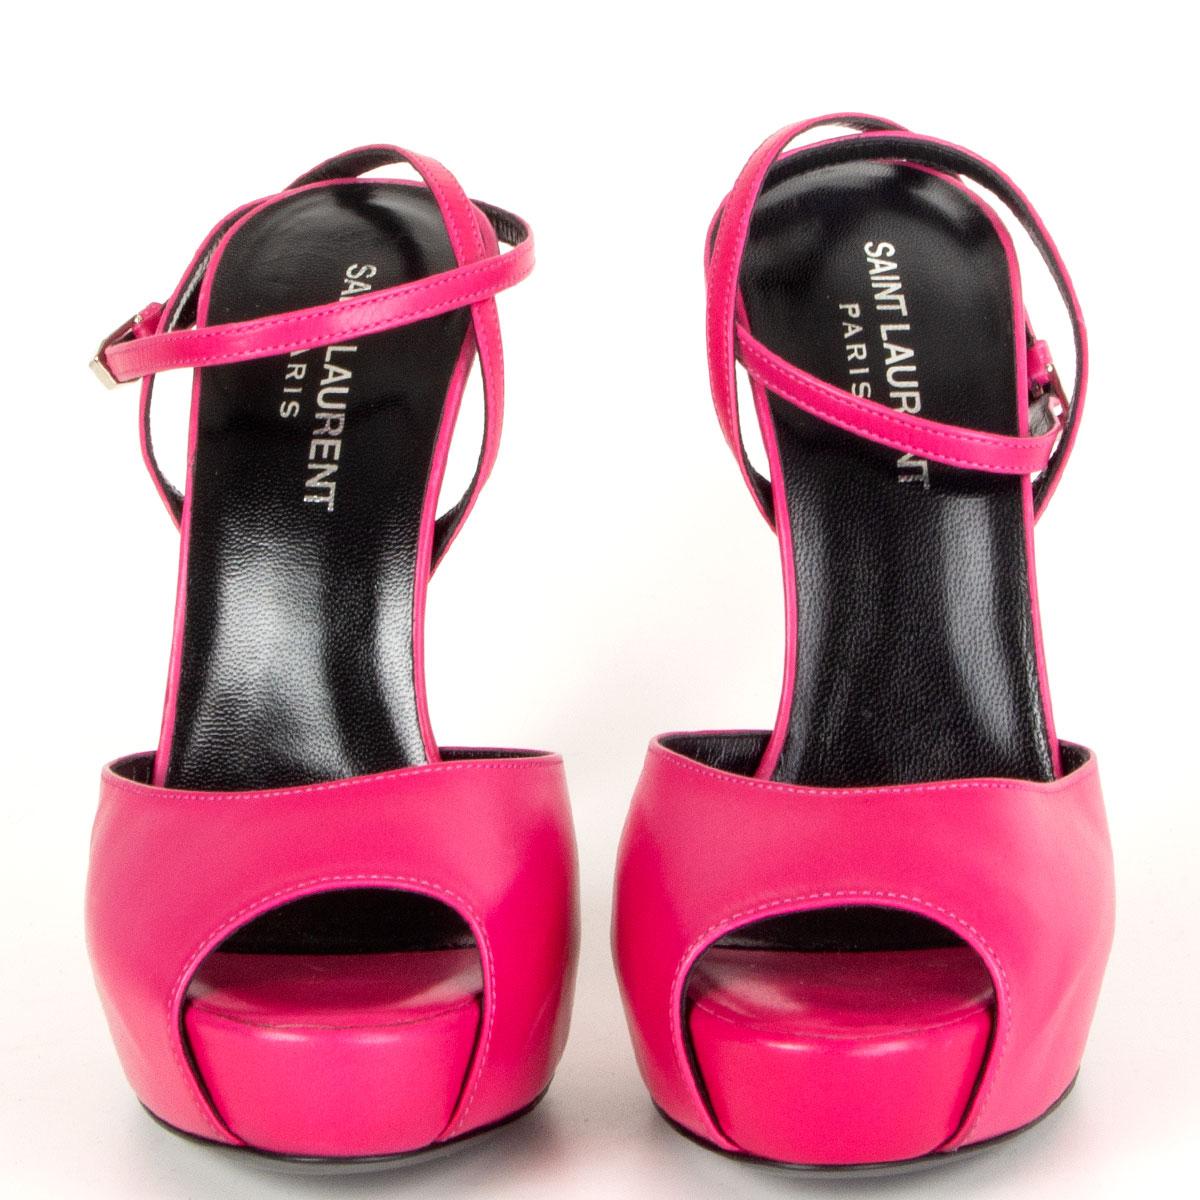 authentic Saint Laurent Debbie open-toe ankle-strap sandals in magenta calfskin. Brand new. Come with dust bag.

Imprinted Size 37
Shoe Size 37
Inside Sole 24cm (9.4in)
Width 7cm (2.7in)
Heel 13cm (5.1in)
Platform 2.5cm (1in)